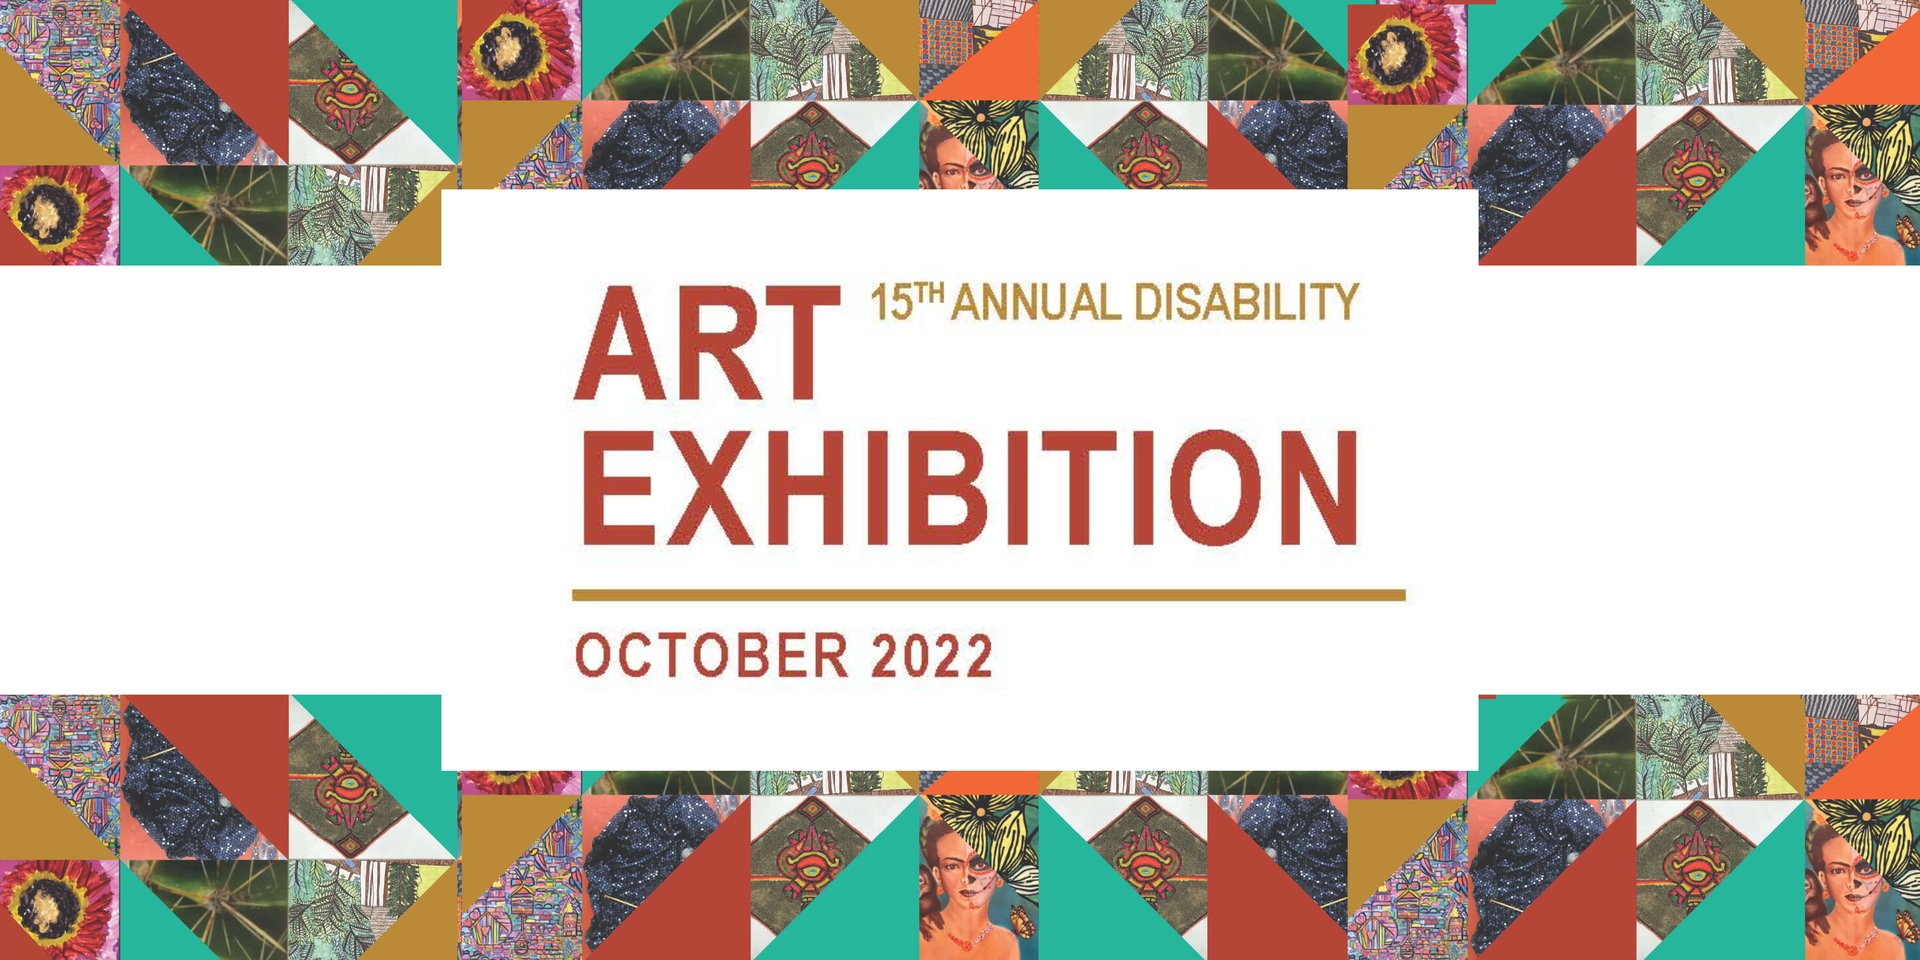 The top and bottom borders are a collage of colored triangles and partial images from art pieces from previous art exhibitions. The burnt orange text reads 15th Annual Disability Art Exhibition October 2022.